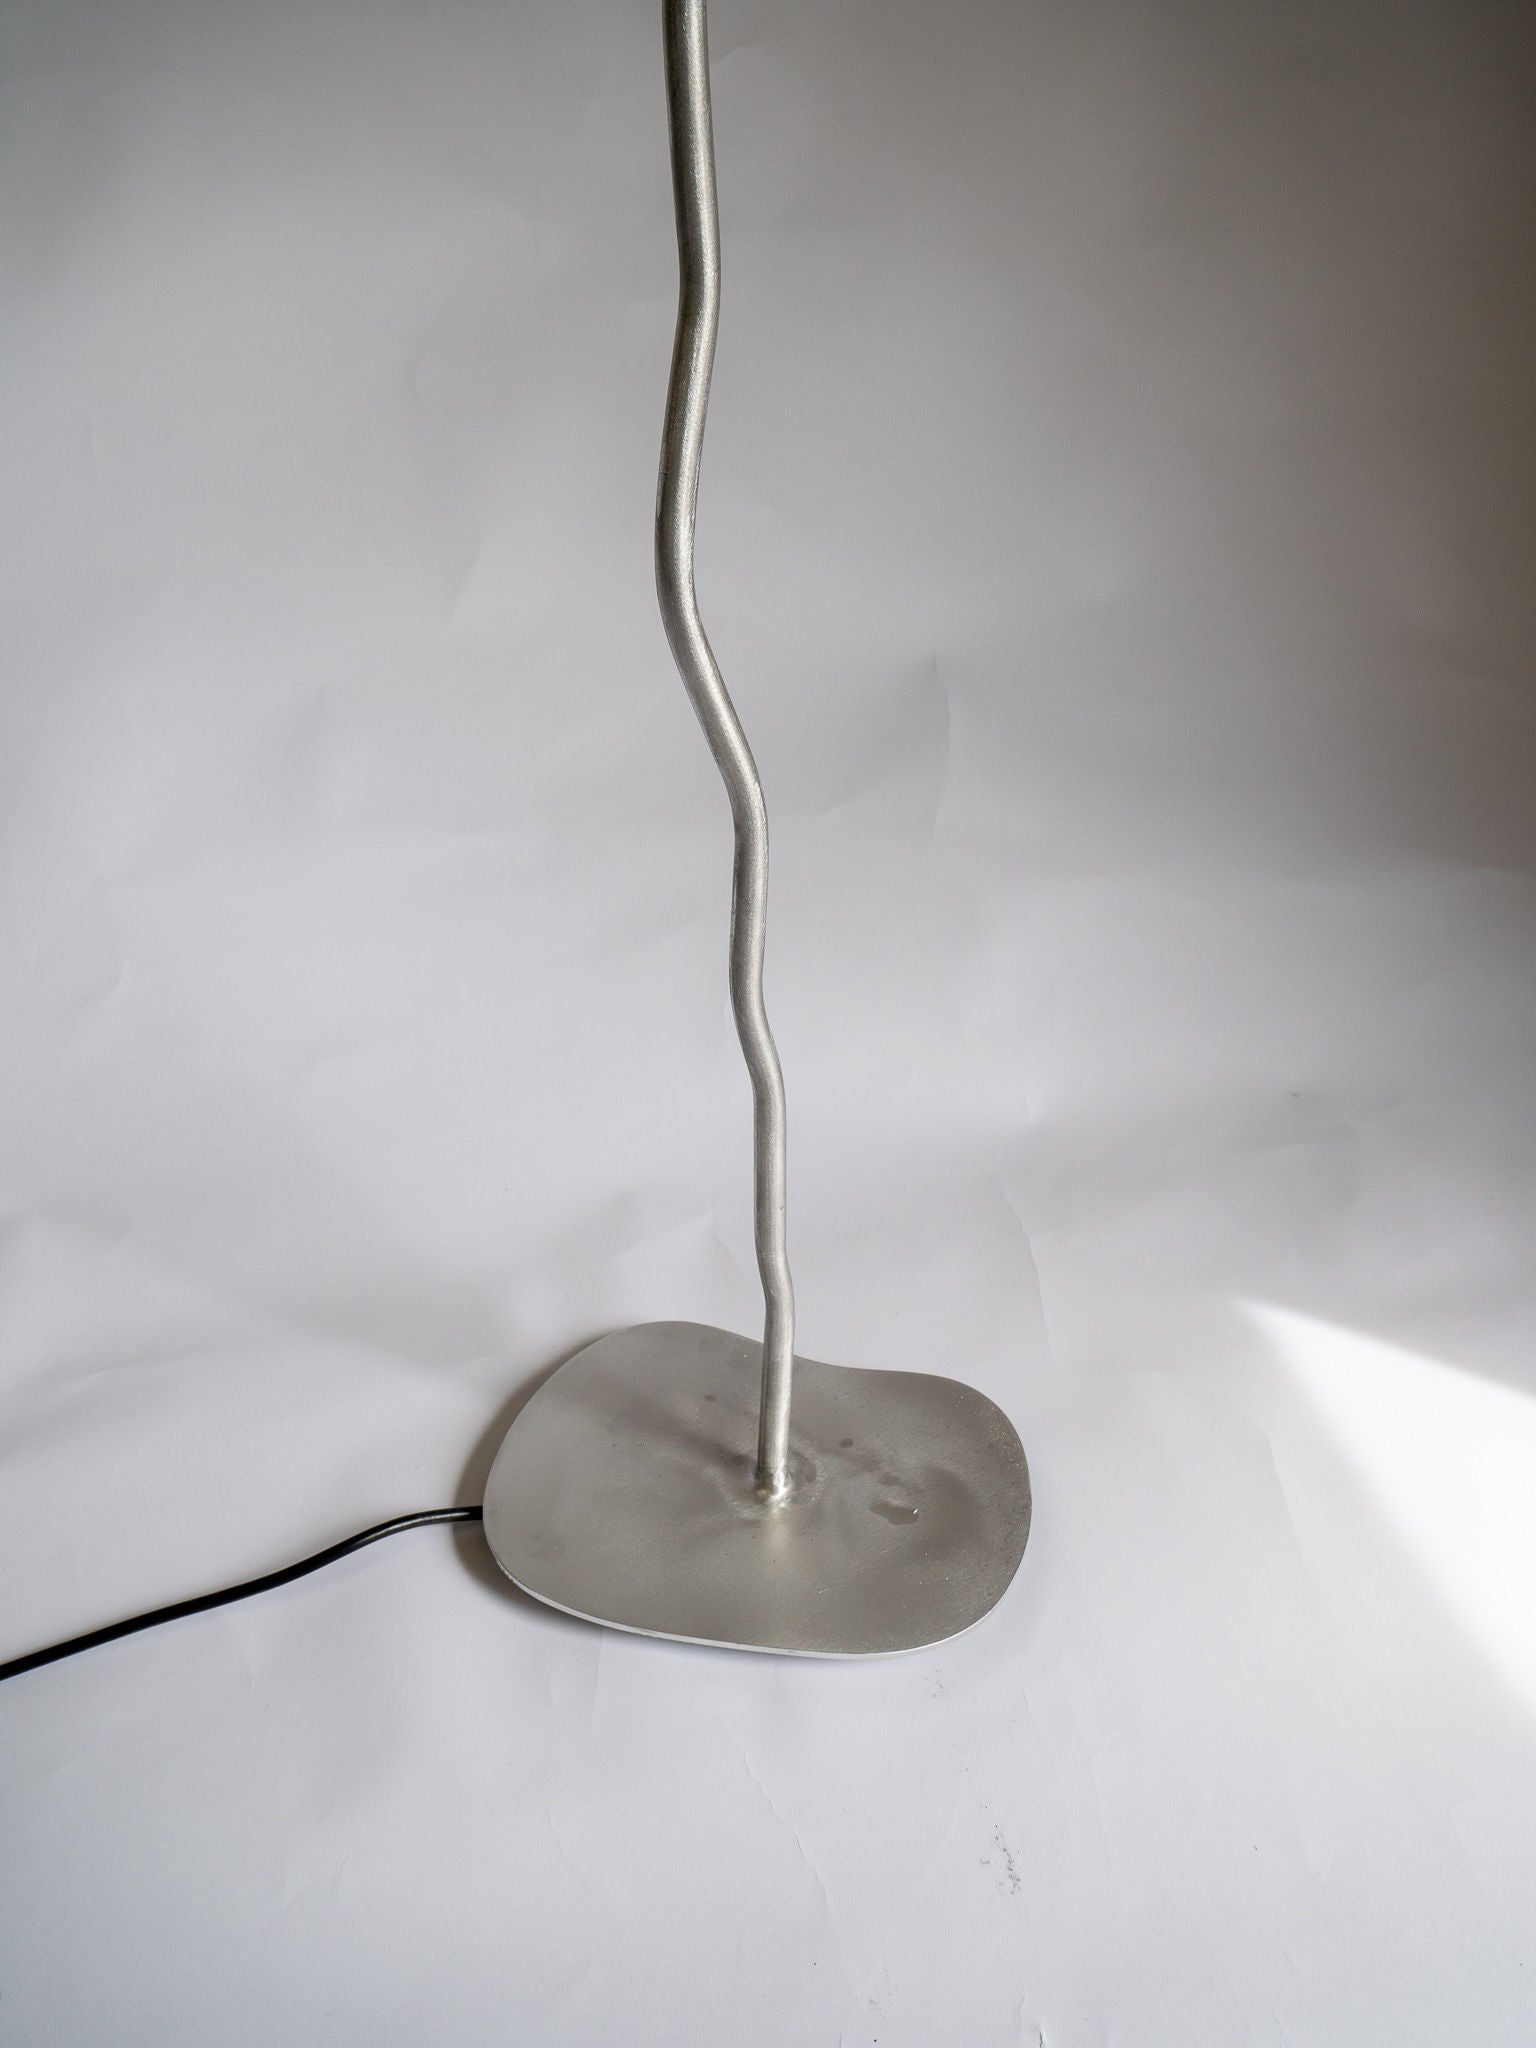  Contemporary lighting fixture with long, flexible neck and metal base